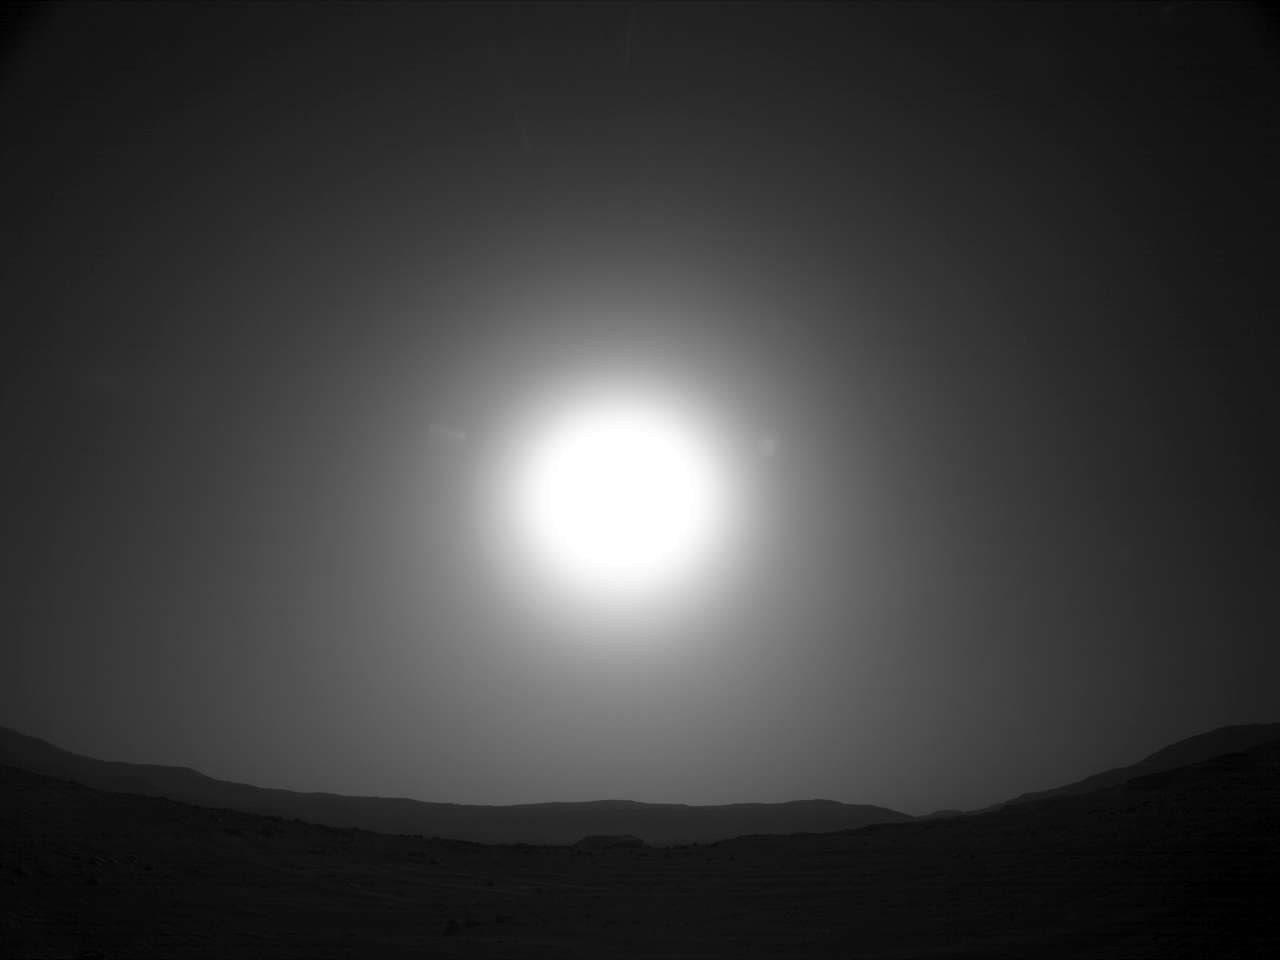 The Sun sets over Jezero crater as seen by the Mars rover Perseverance on Sol 4, the fifth Martian day after it landed (landing day is Sol 0; Sol 4 was February 23, 2021). Credit: NASA/JPL-Caltech